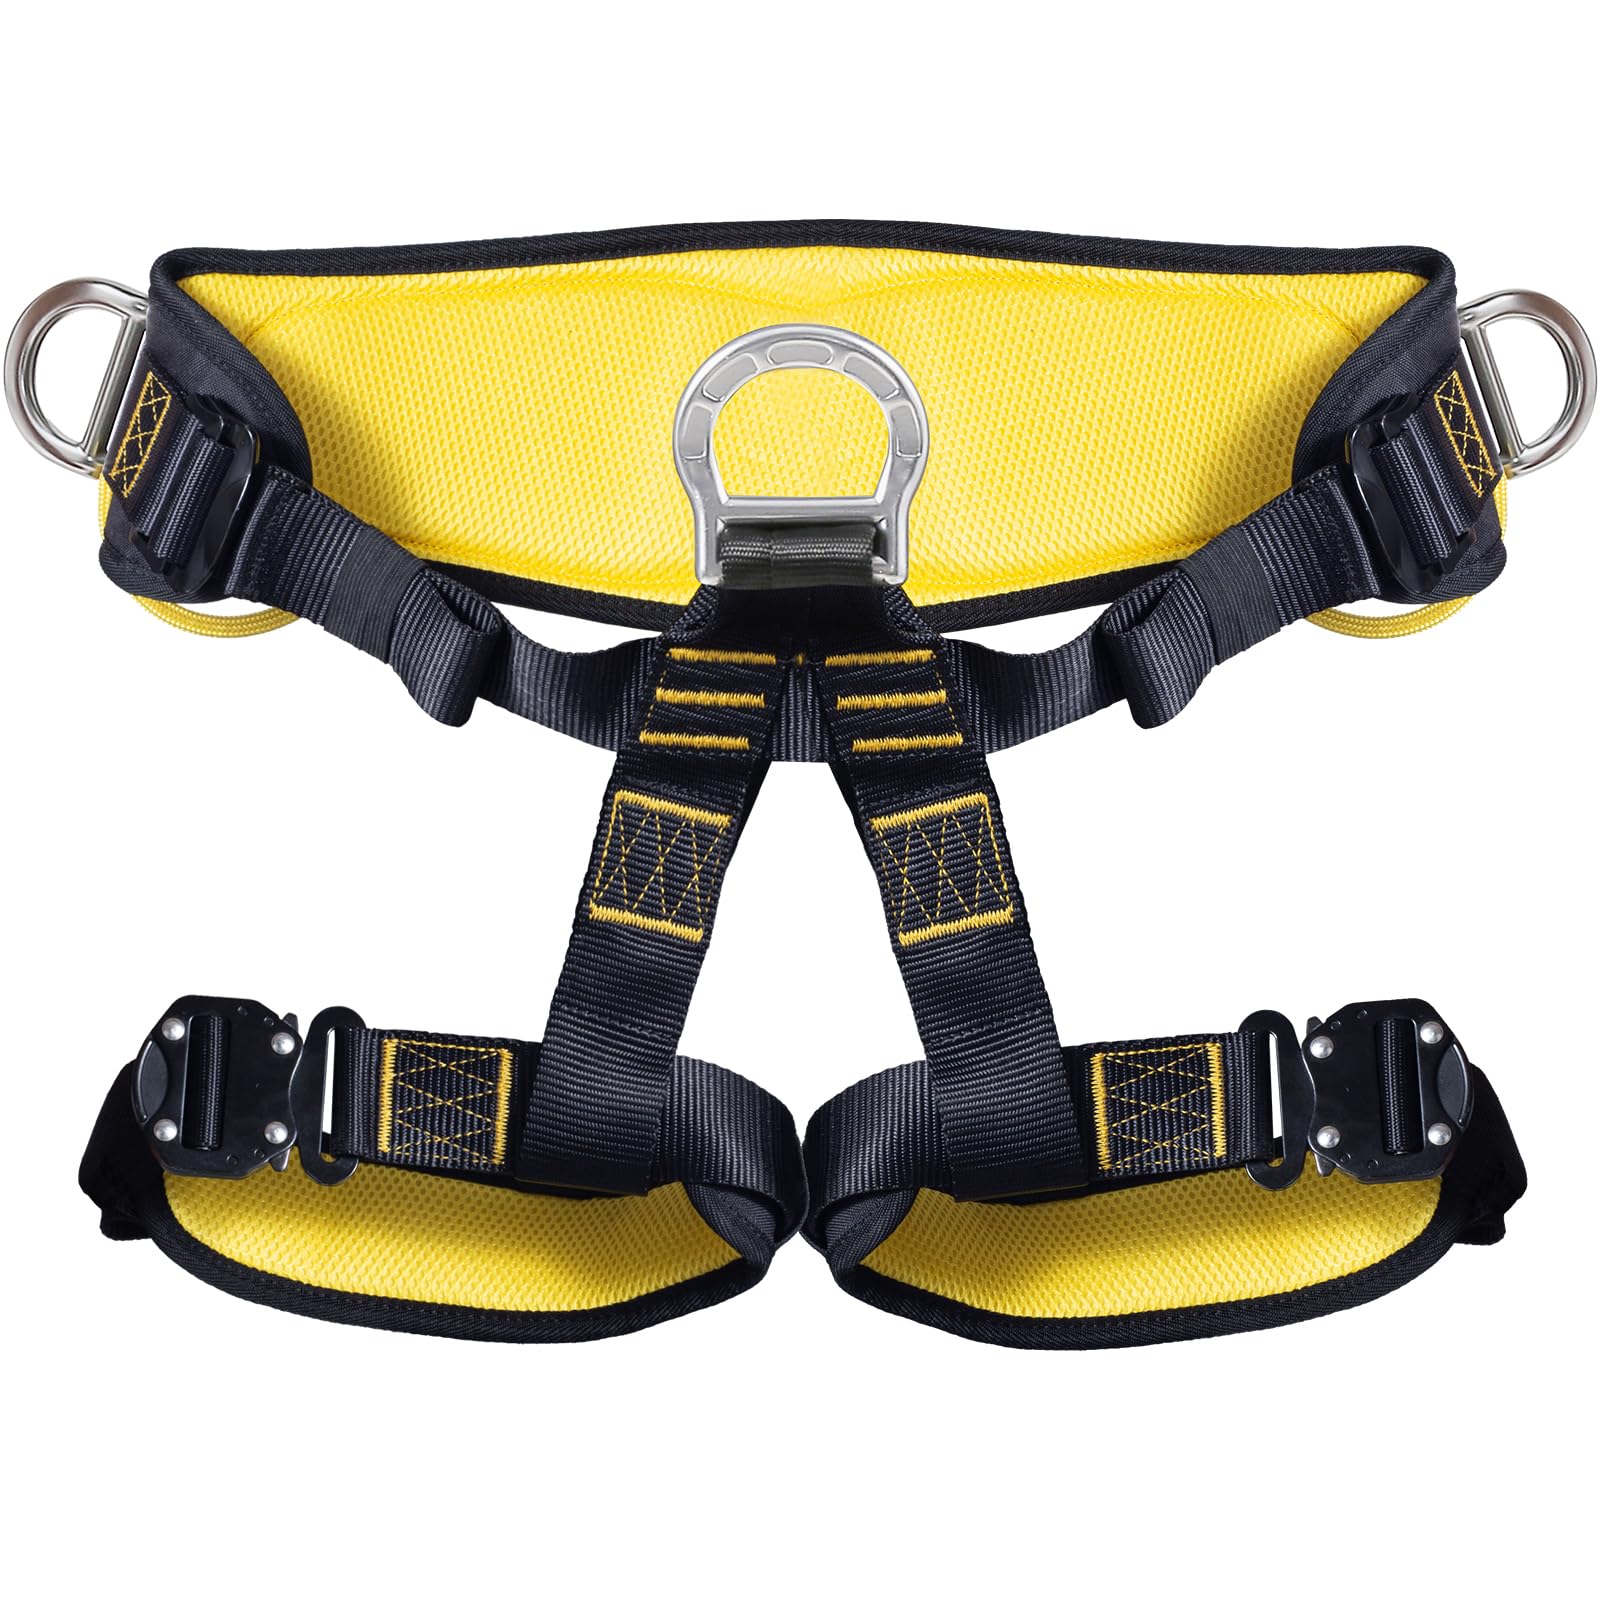 VEVOR Half Body Safety Harness, Tree Climbing Harness with Added Padding on Waist and Leg, Half Protection Harness 340 lbs, ASTM F1772-17 Certification, for Fire Rescuing Caving Rock Climbing